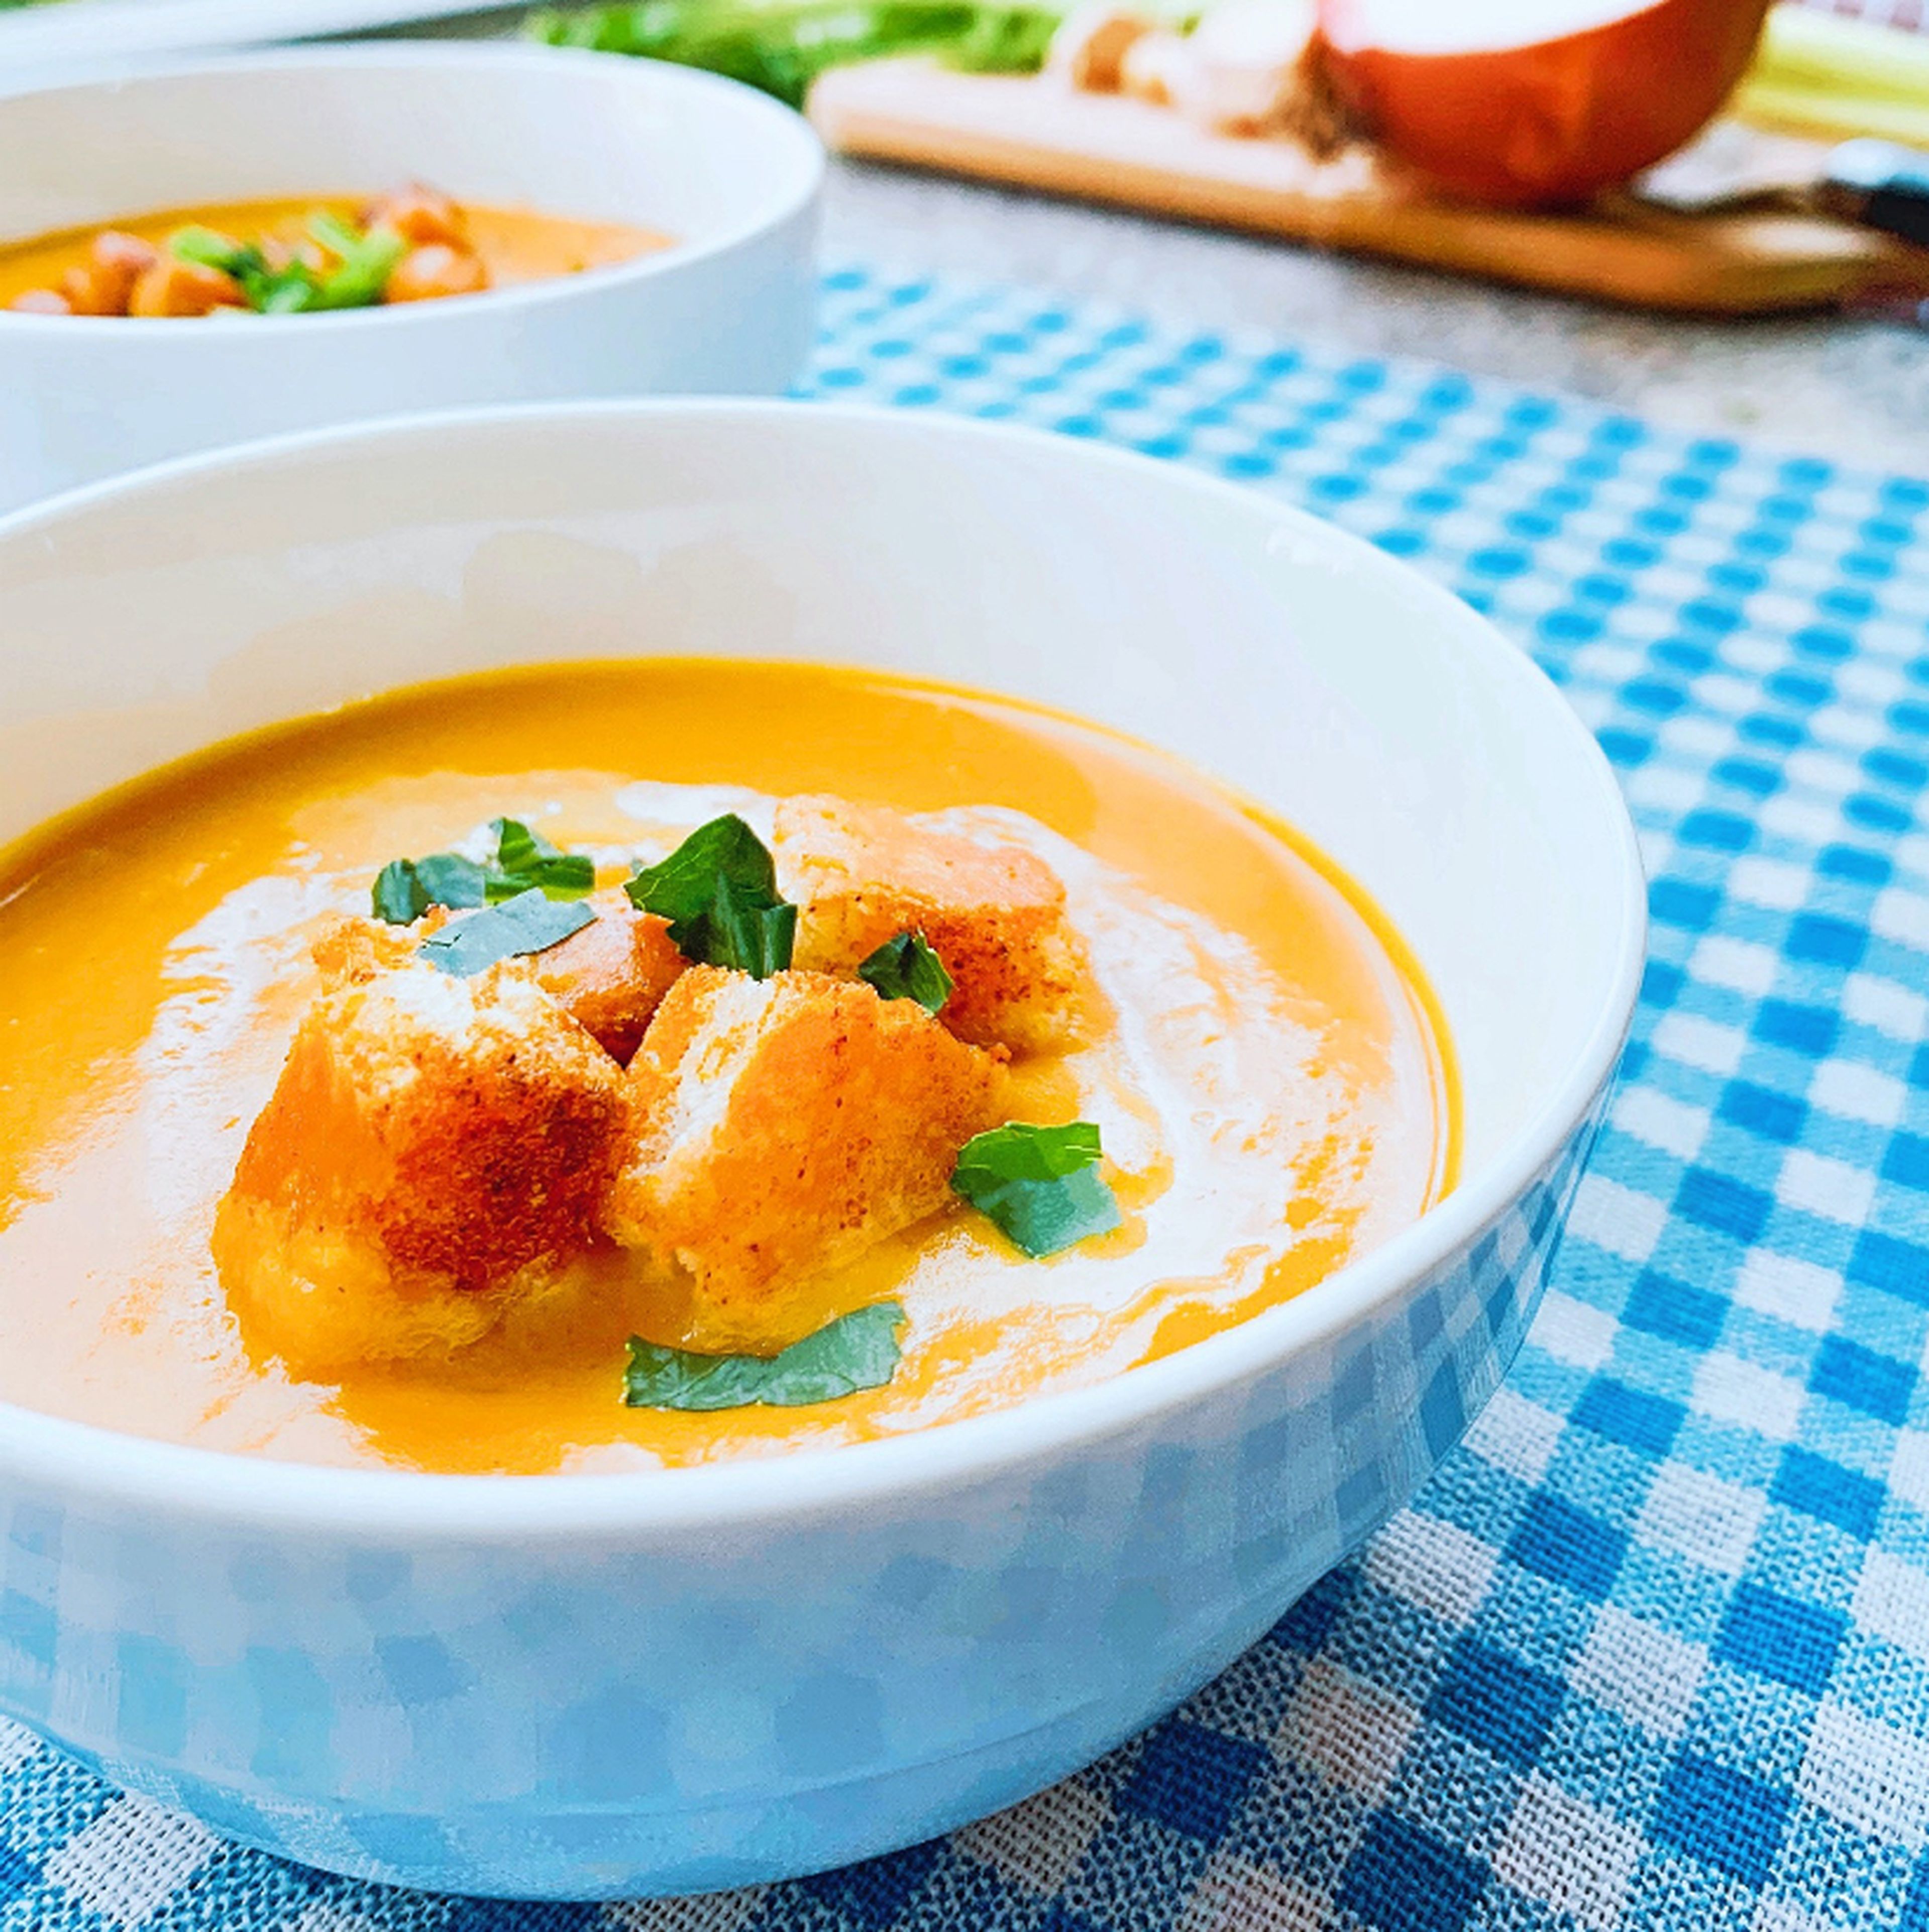 Use a soup spoon to scoop the warm soup into bowls. Top with crunchy croutons and chickpeas and enjoy!